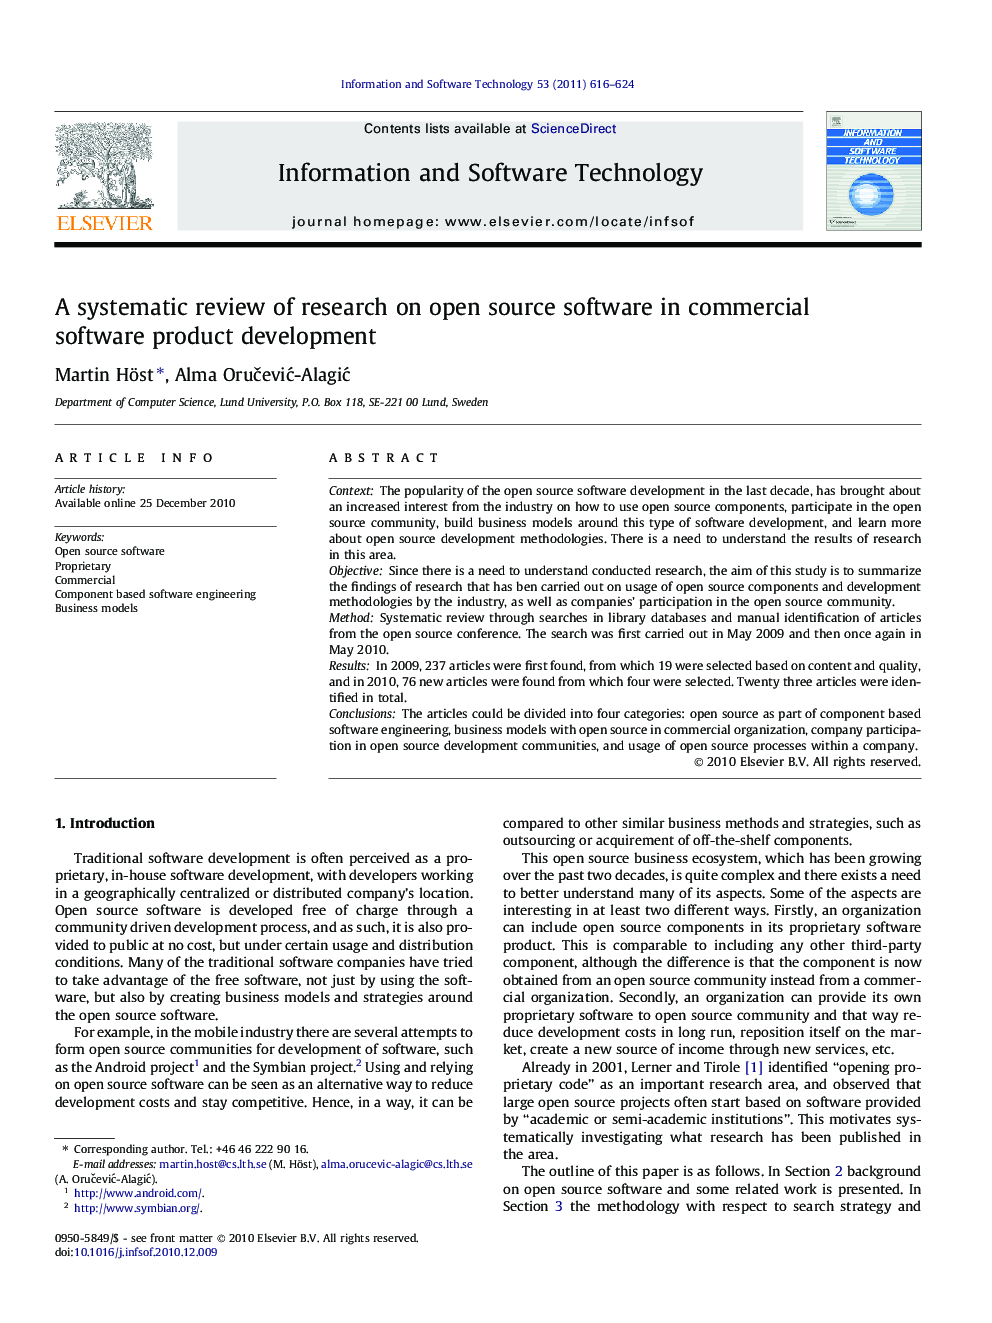 A systematic review of research on open source software in commercial software product development